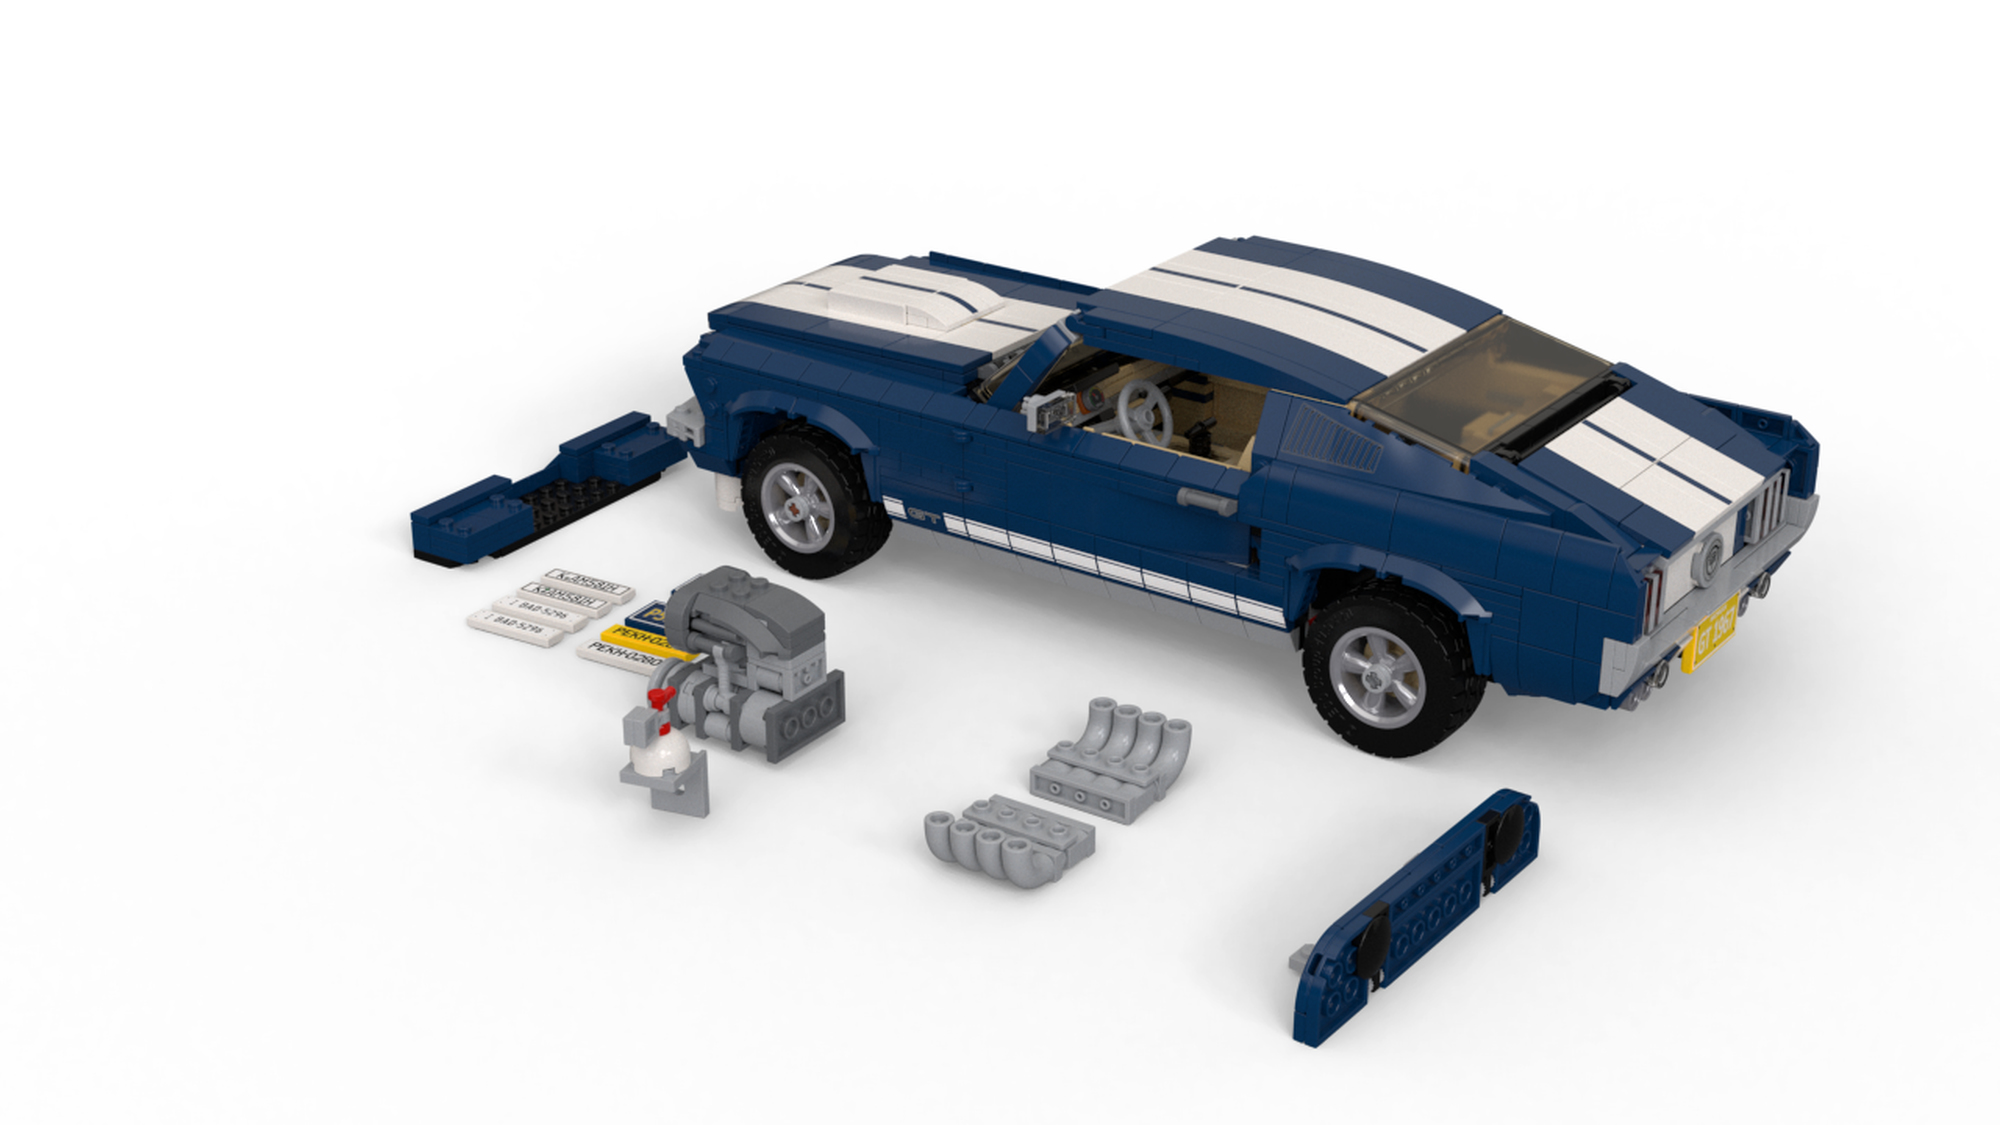 LEGO 10265 Ford Mustang GT, 5702016368260